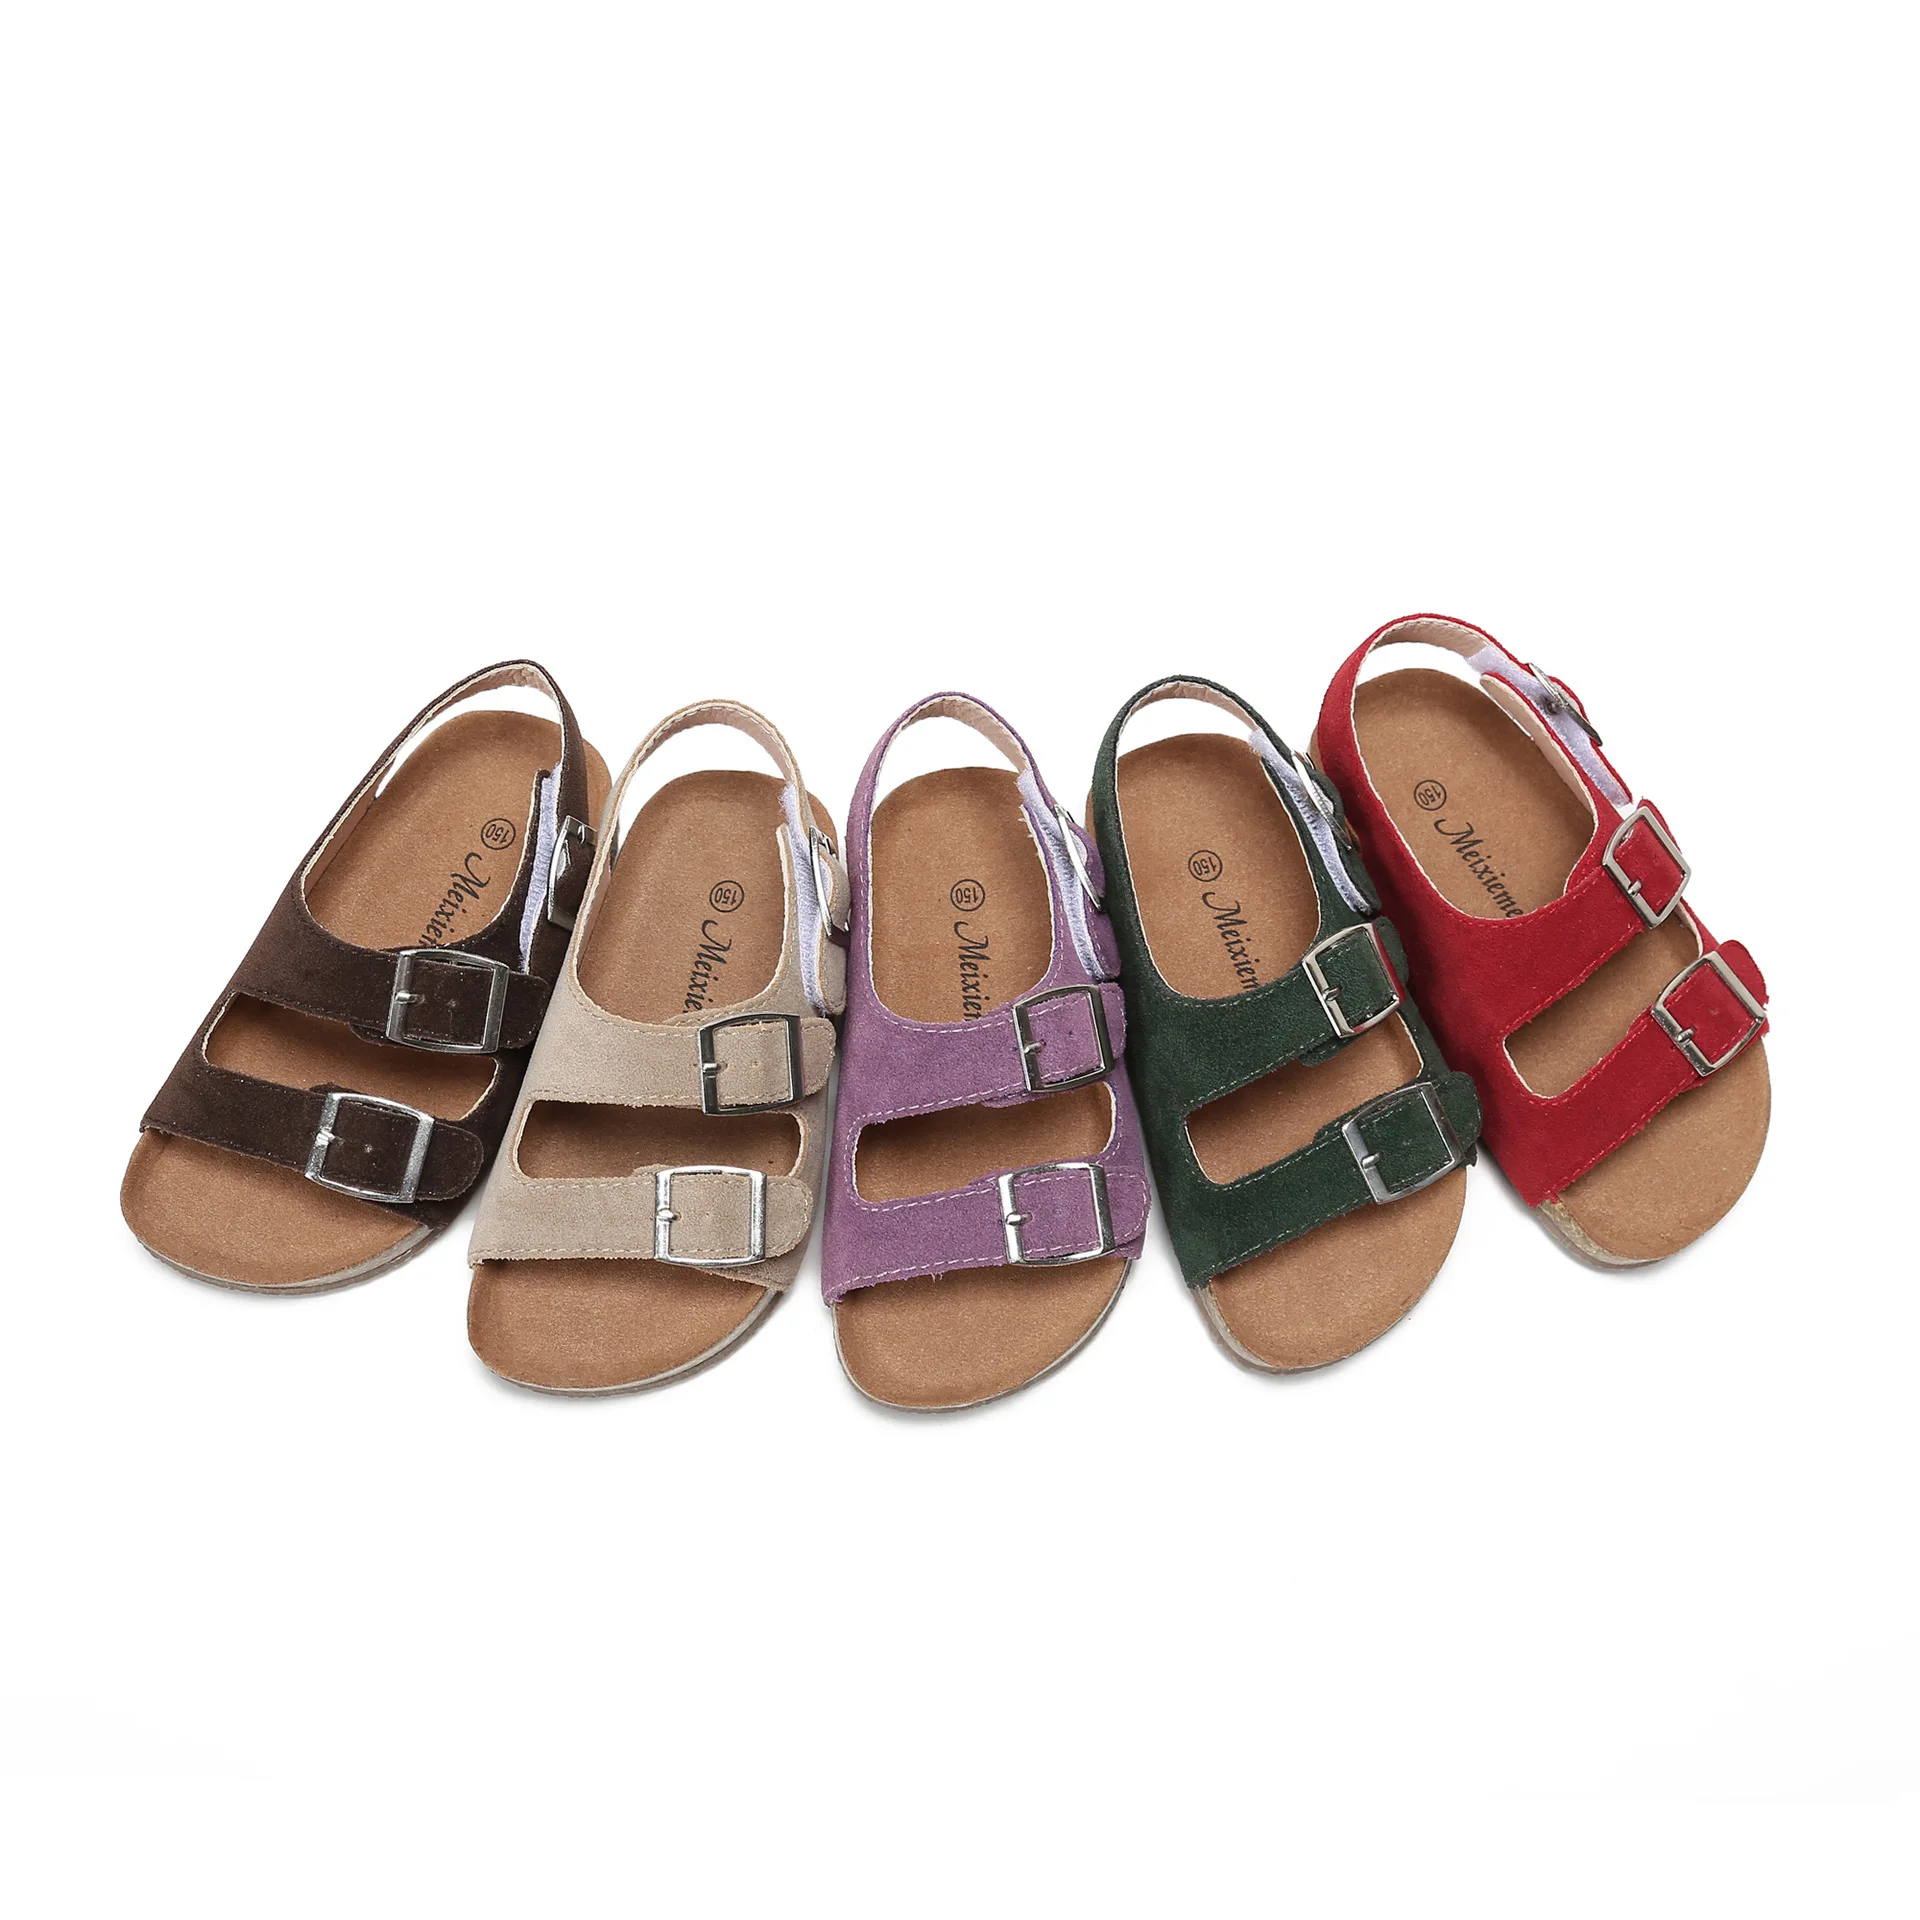 

11colour New Strap Leather Insole Children Kids Girls Boys Sandals, 11 colour for your choose